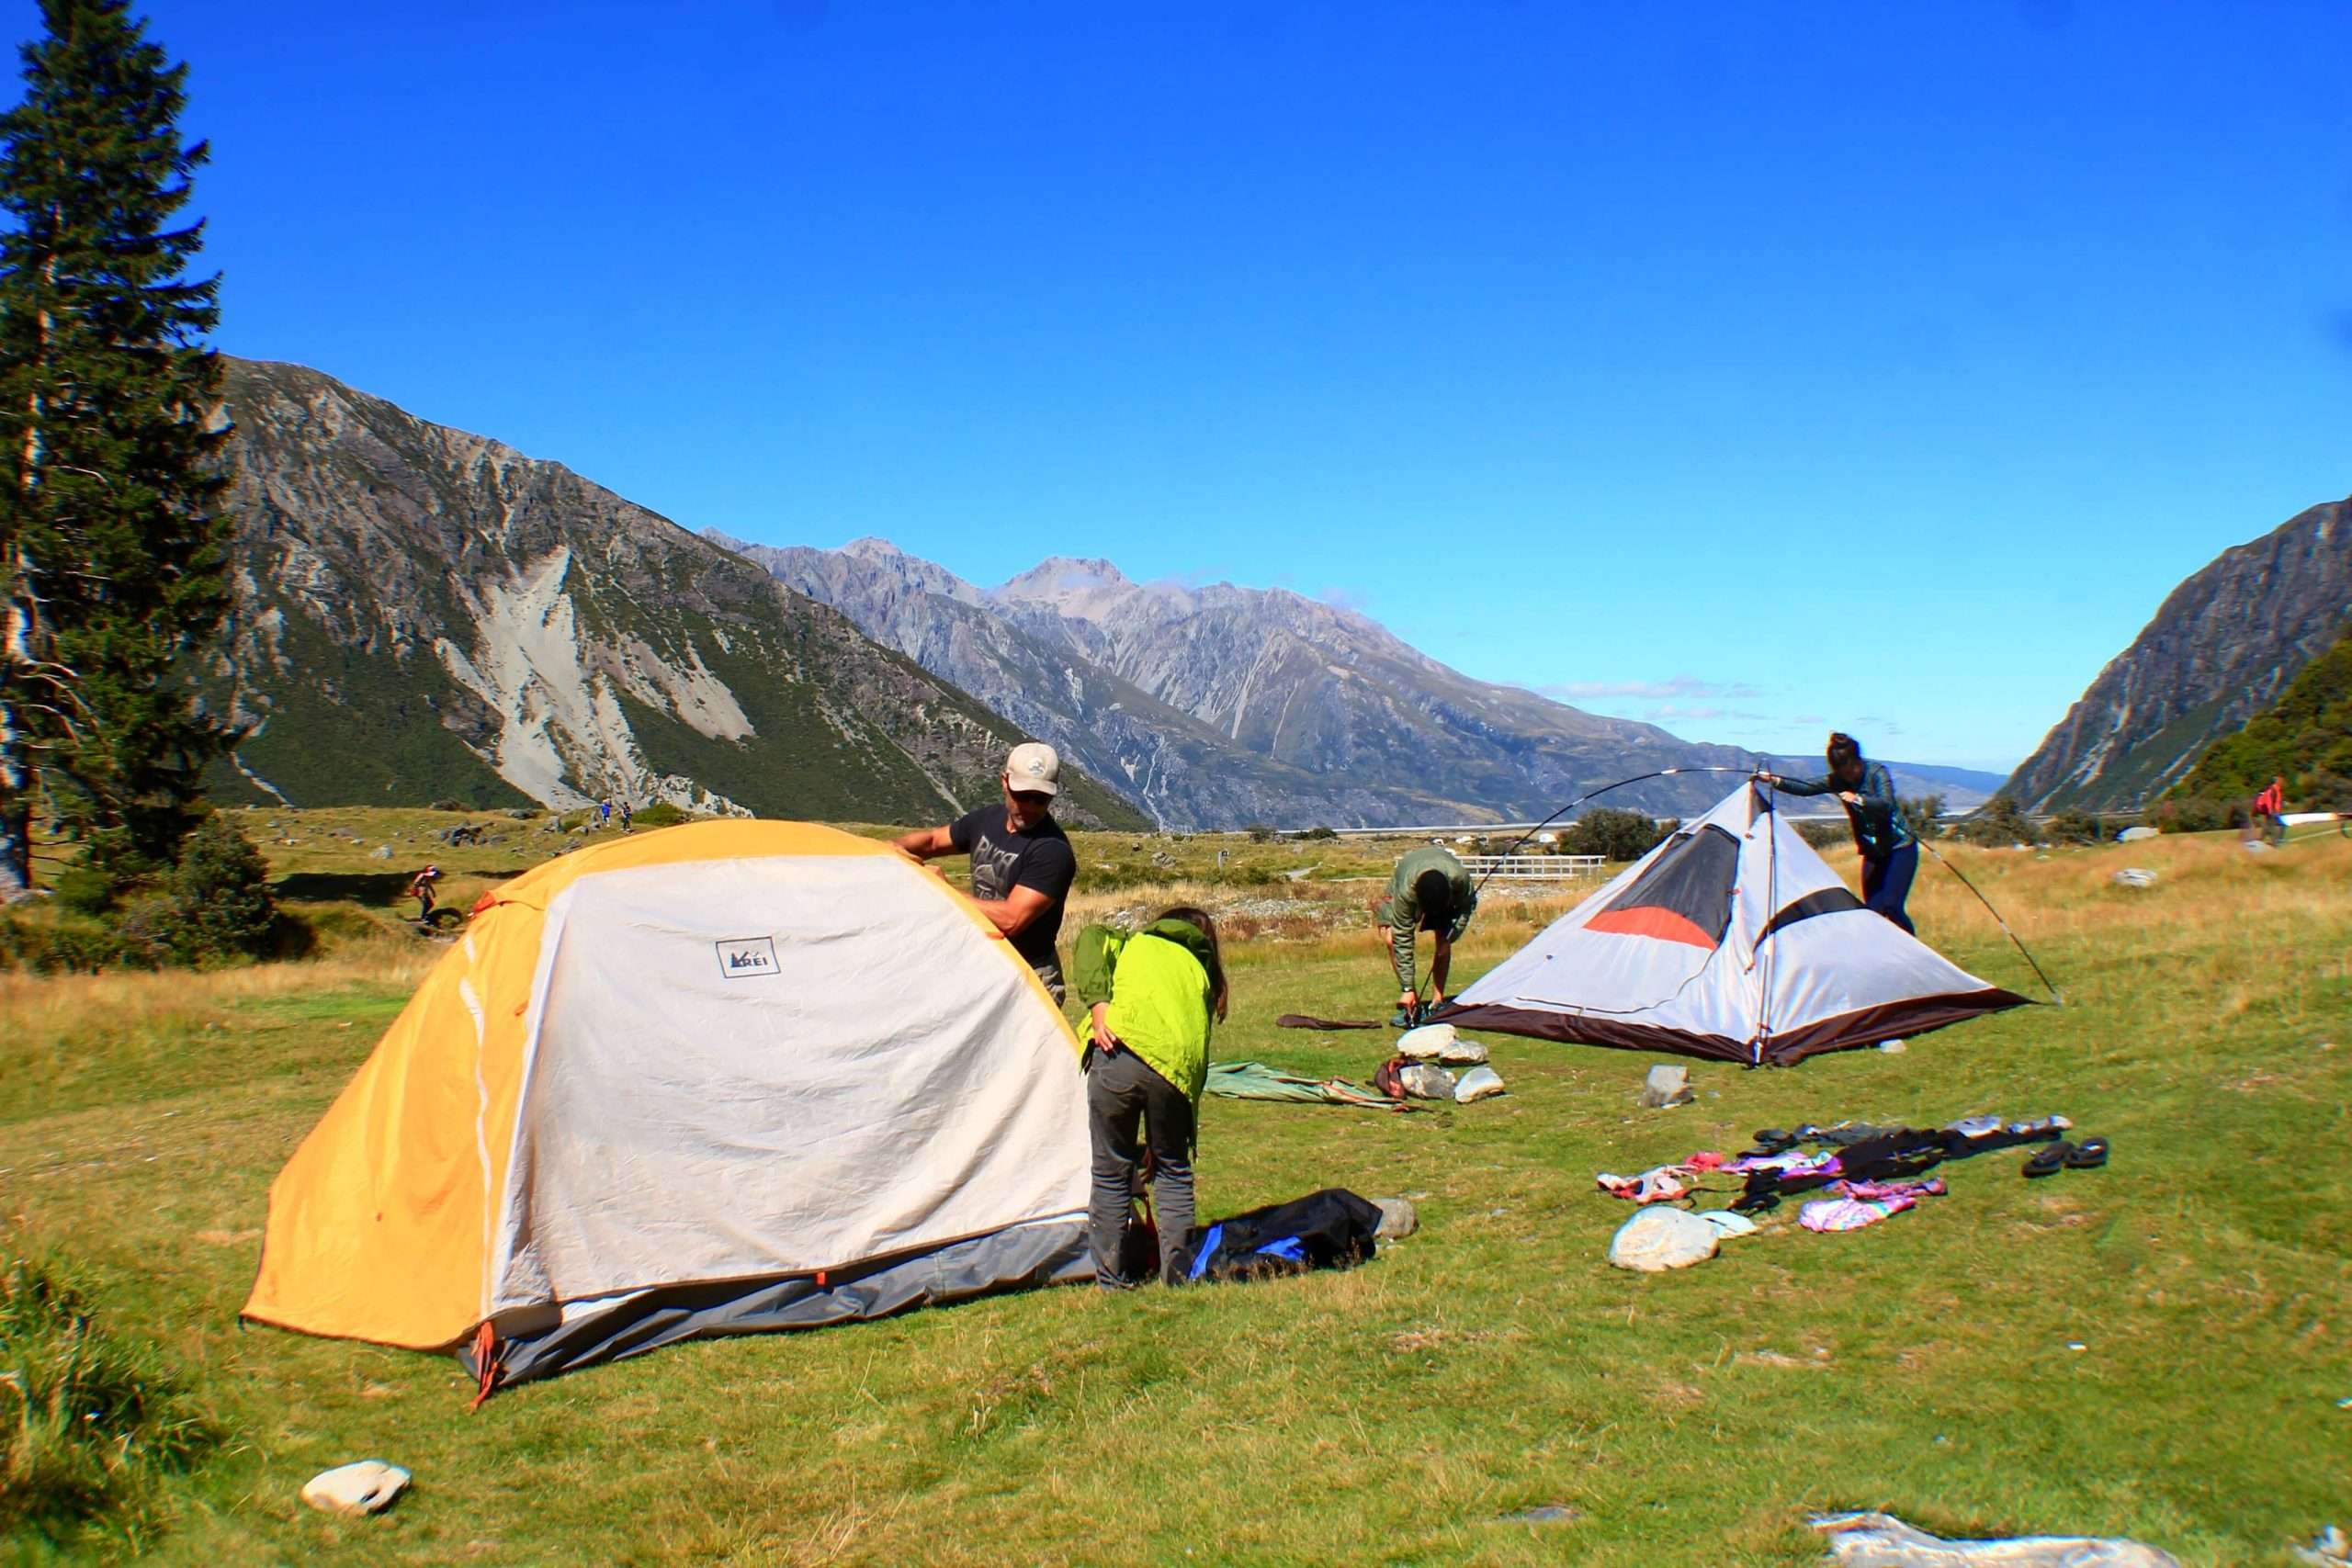 White horse hill campground, Mount Cook, 3 week New ...